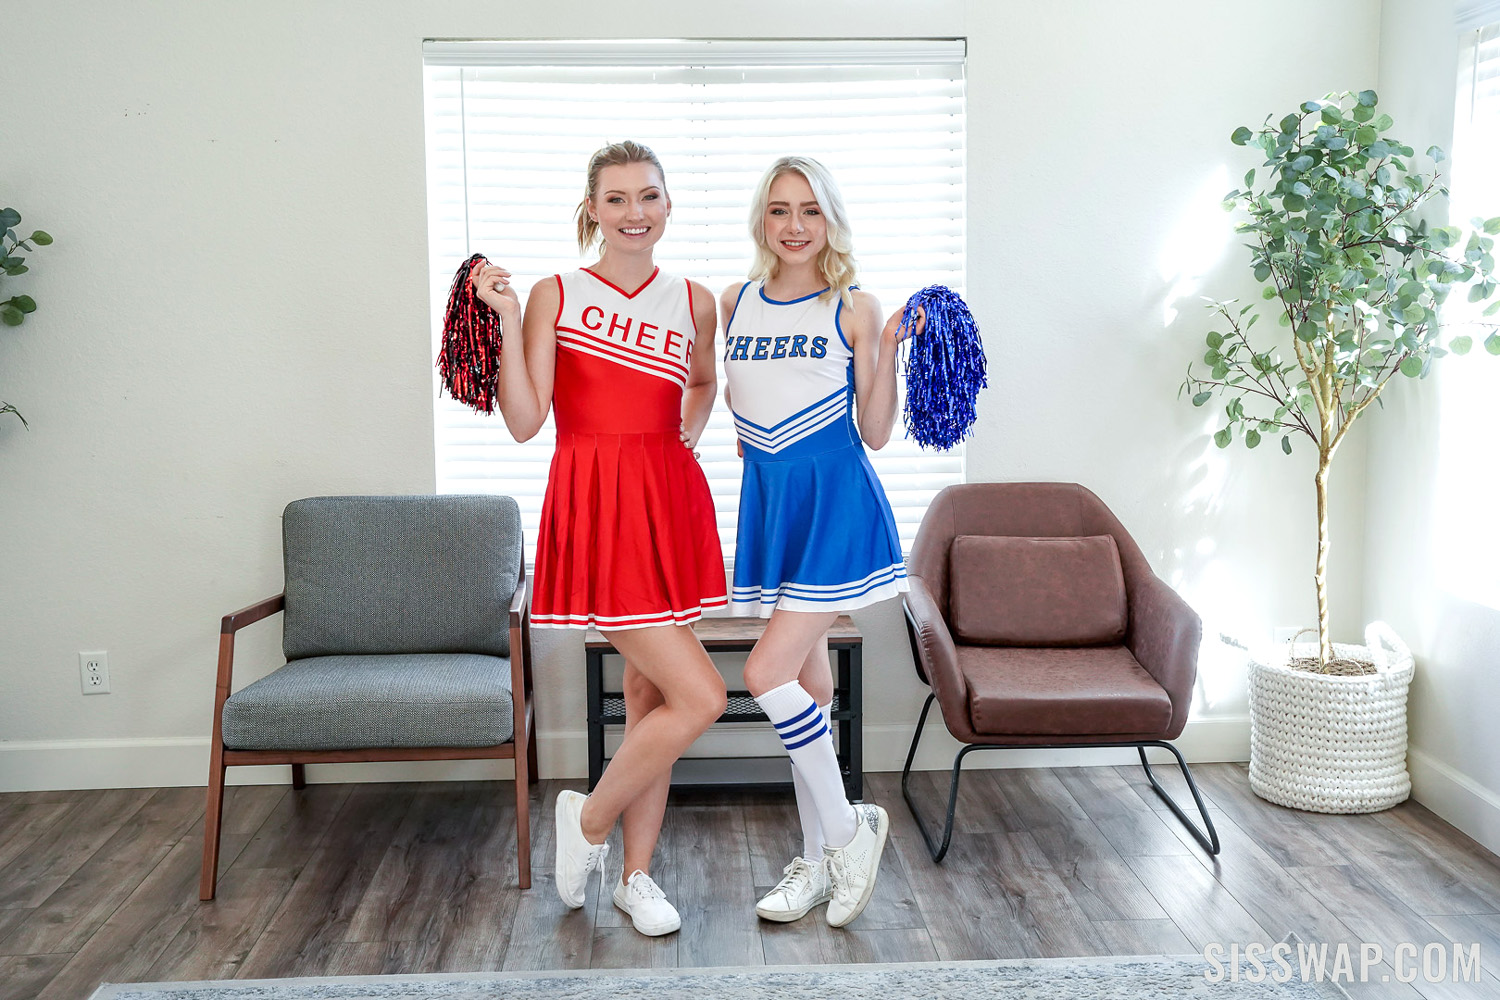 Emma Sirus and Scarlett Hampton swapping cocks after cheerleader practice